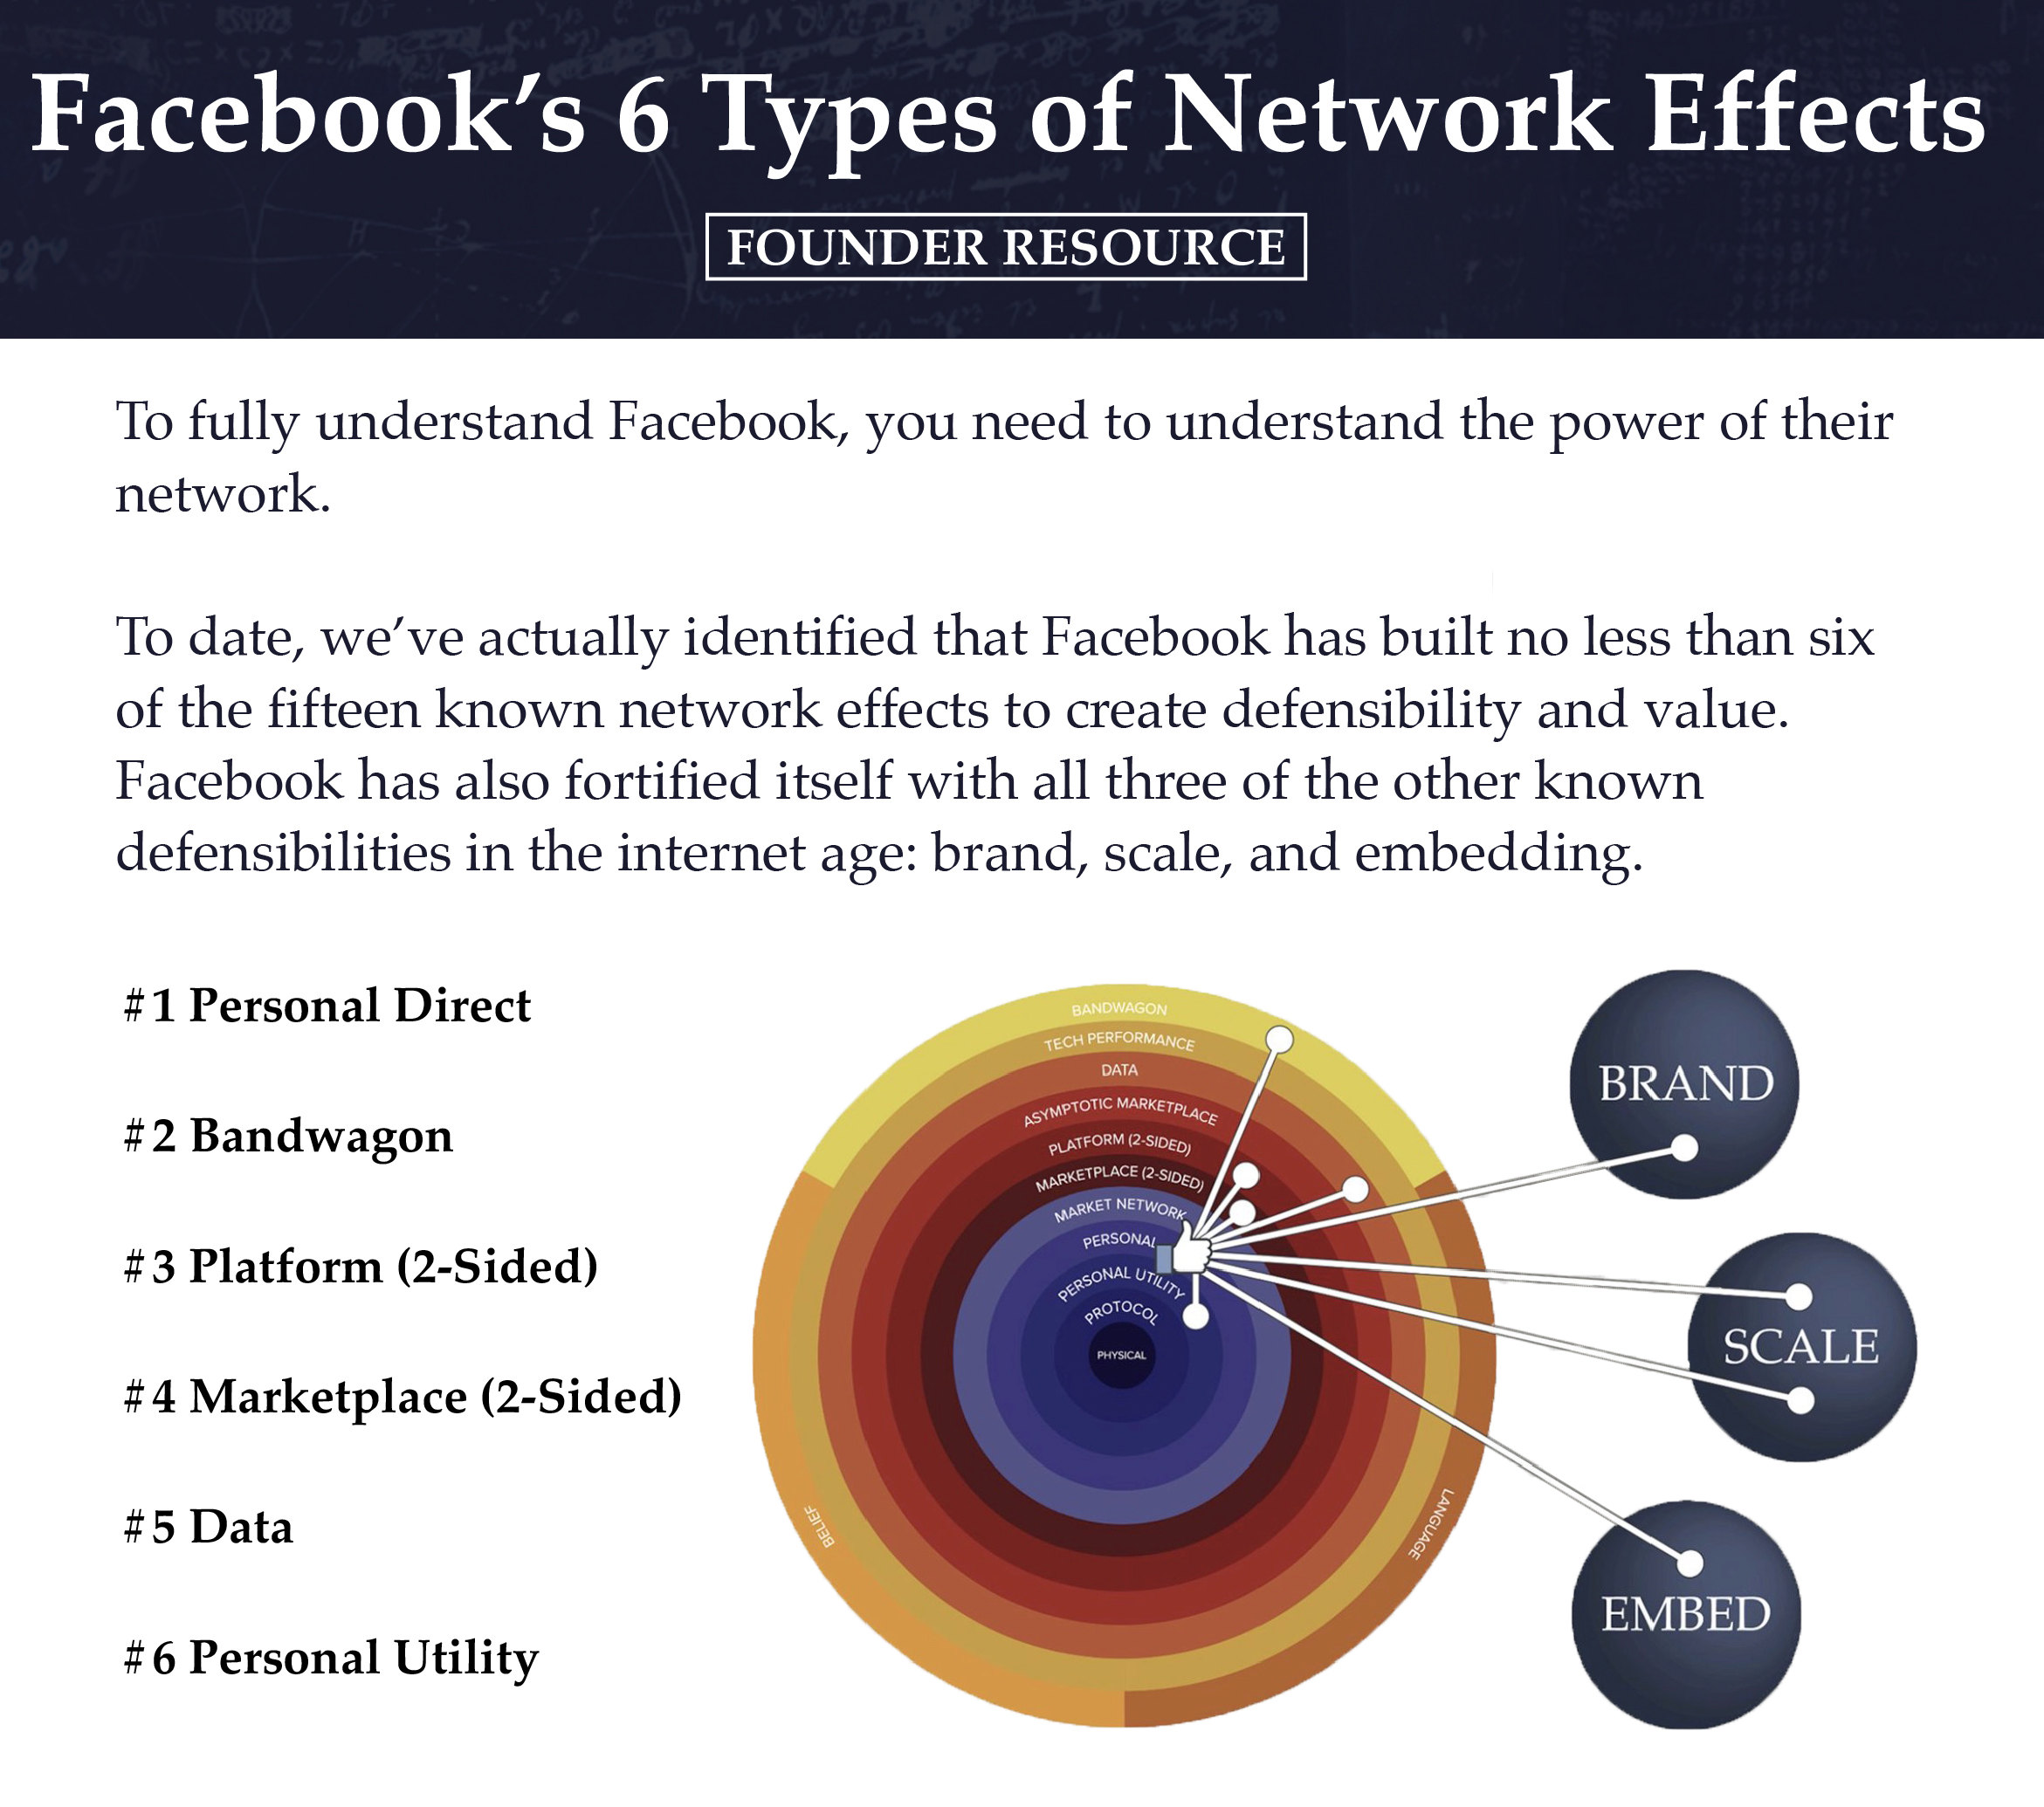 Facebook's Network Effects